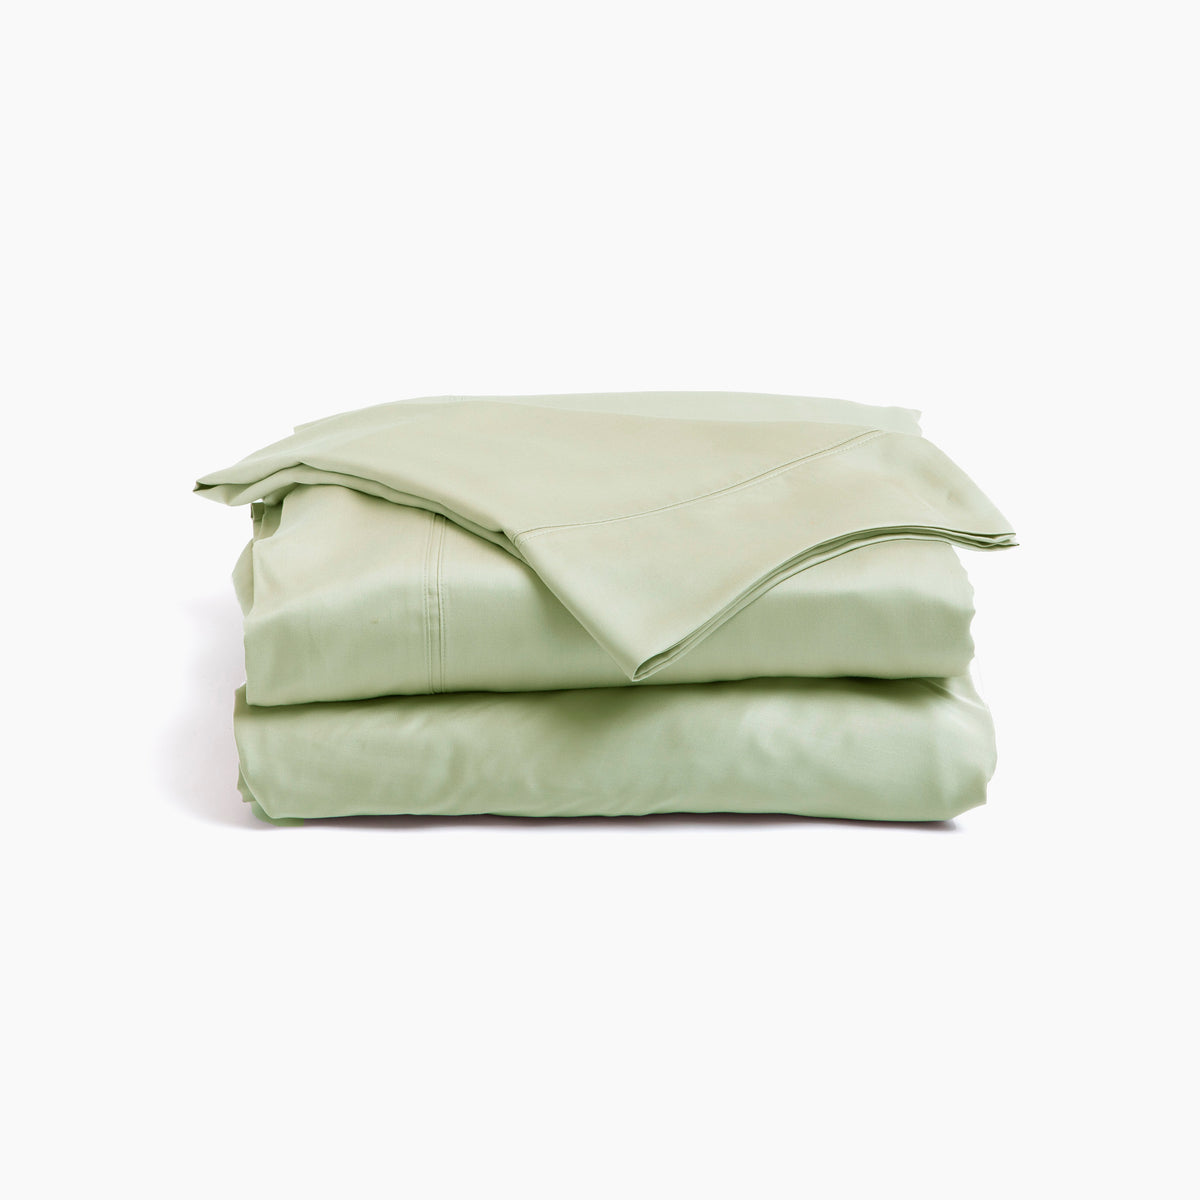 Image showcasing entire Sage Recovery Viscose Sheet Set all neatly folded on top of one another with a white background. The image shows (from top to bottom): pillowcase, flat sheet, fitted sheet